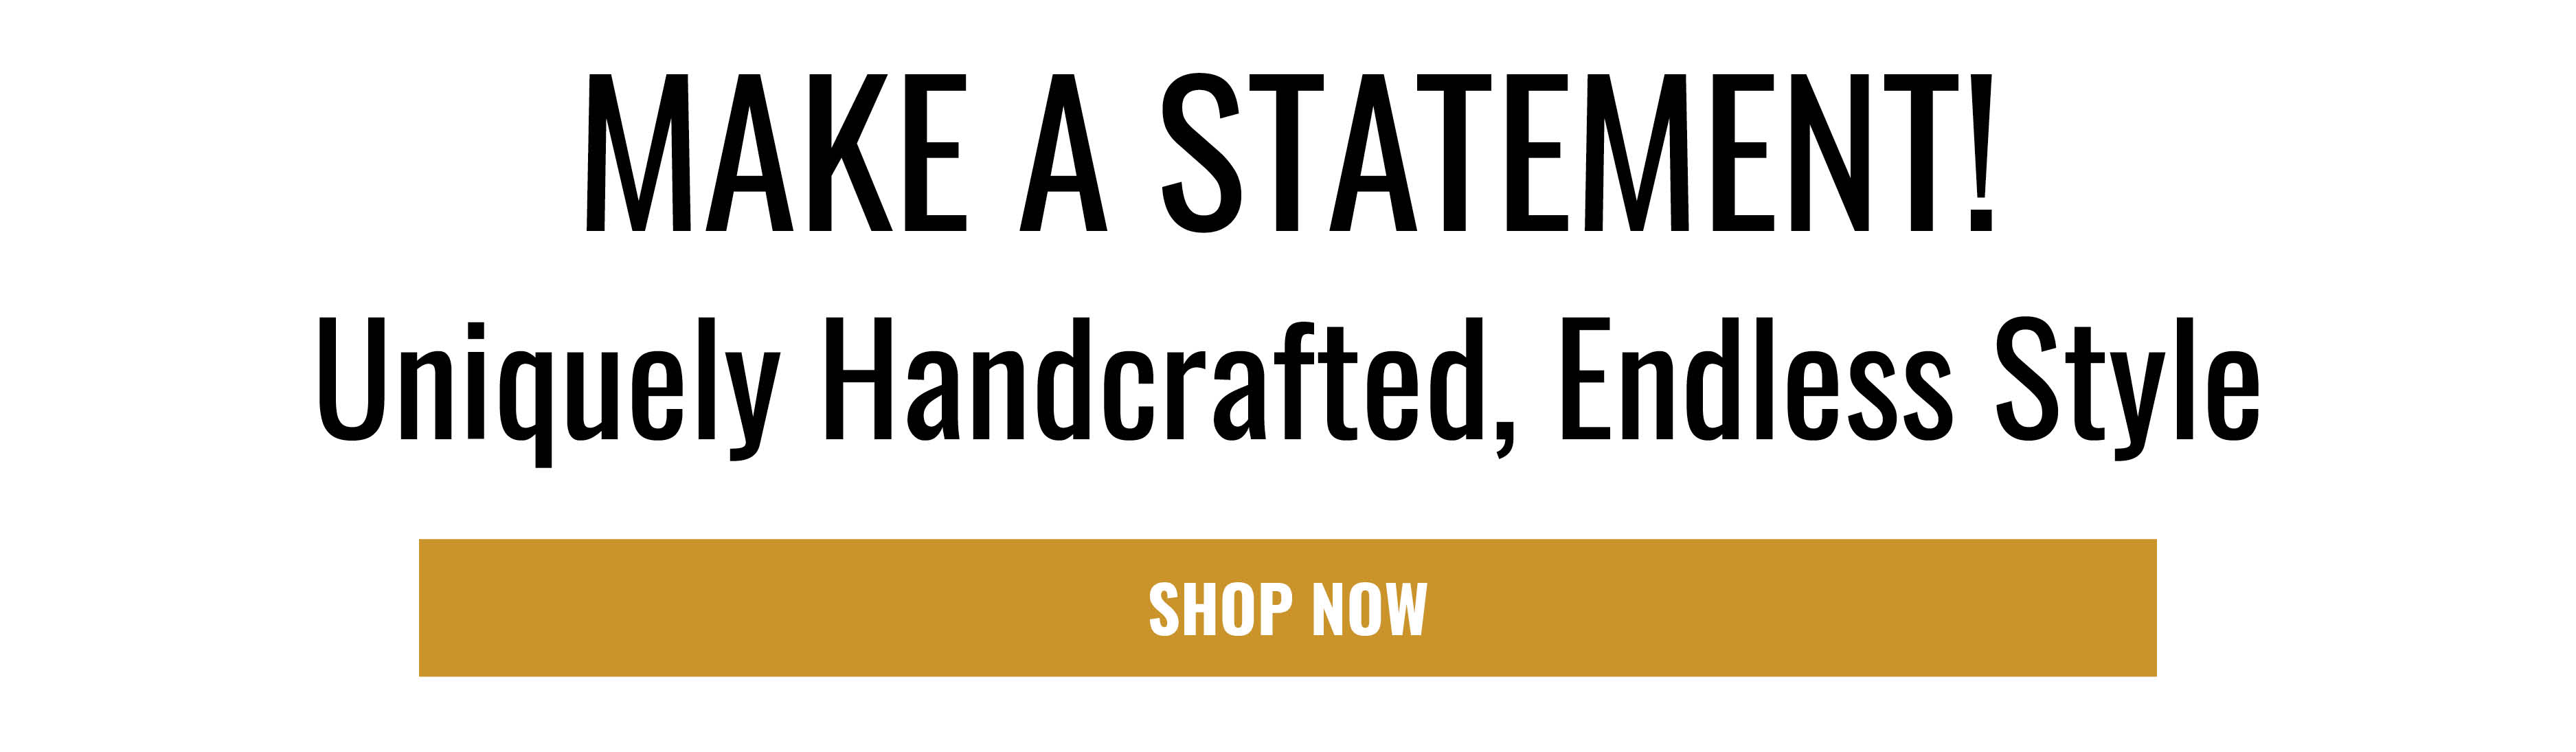 MAKE A STATEMENT! Uniquely Handcrafted, Endless Style SHOP NOW